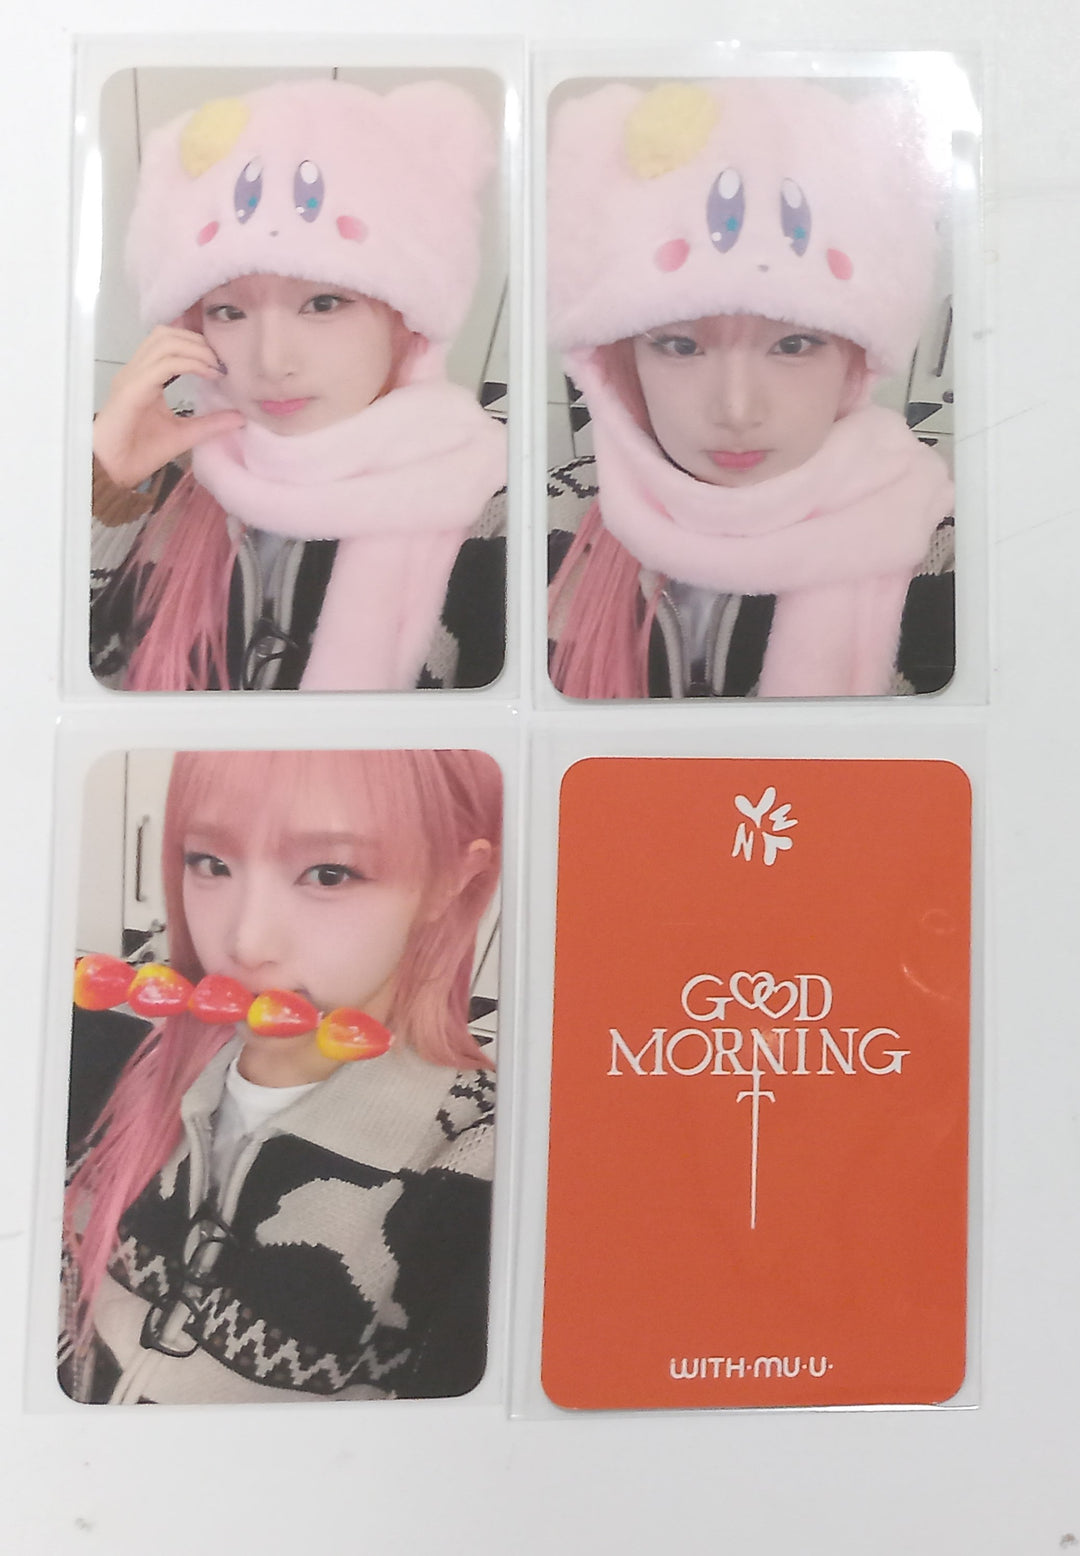 YENA "Good Morning" - Withmuu Fansign Event Photocard Round 2 [24.2.2]